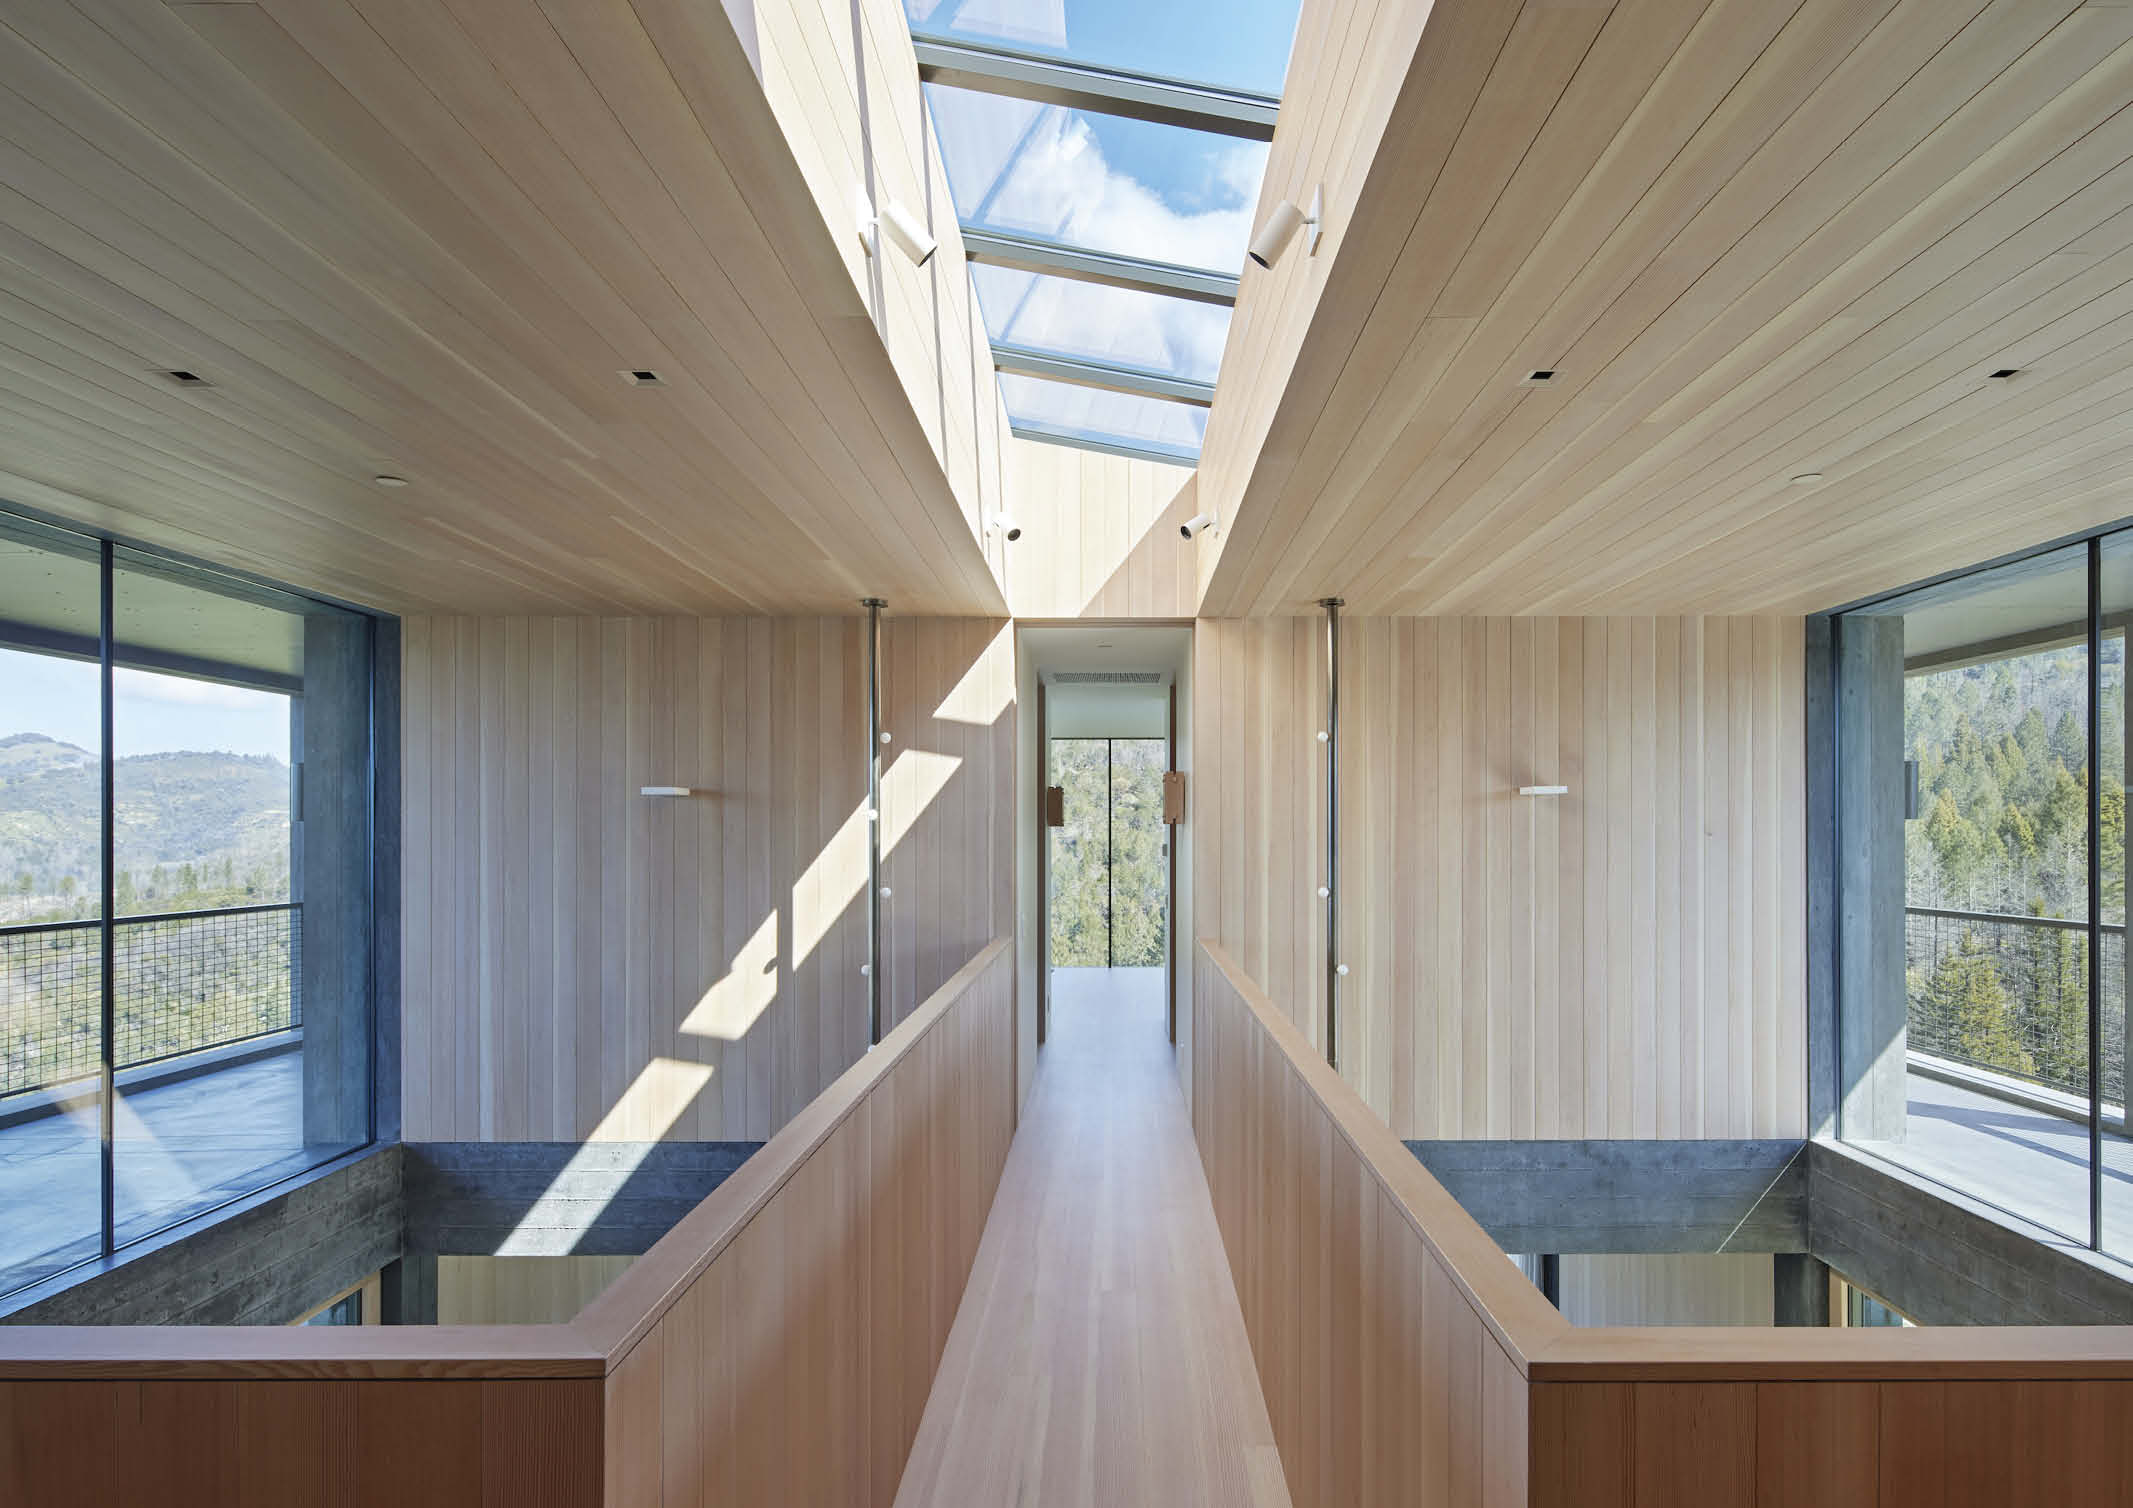 the inside of a modern two storey house design with wooden cladding on the walls and ceilings, and a skylight above a bridgeway.